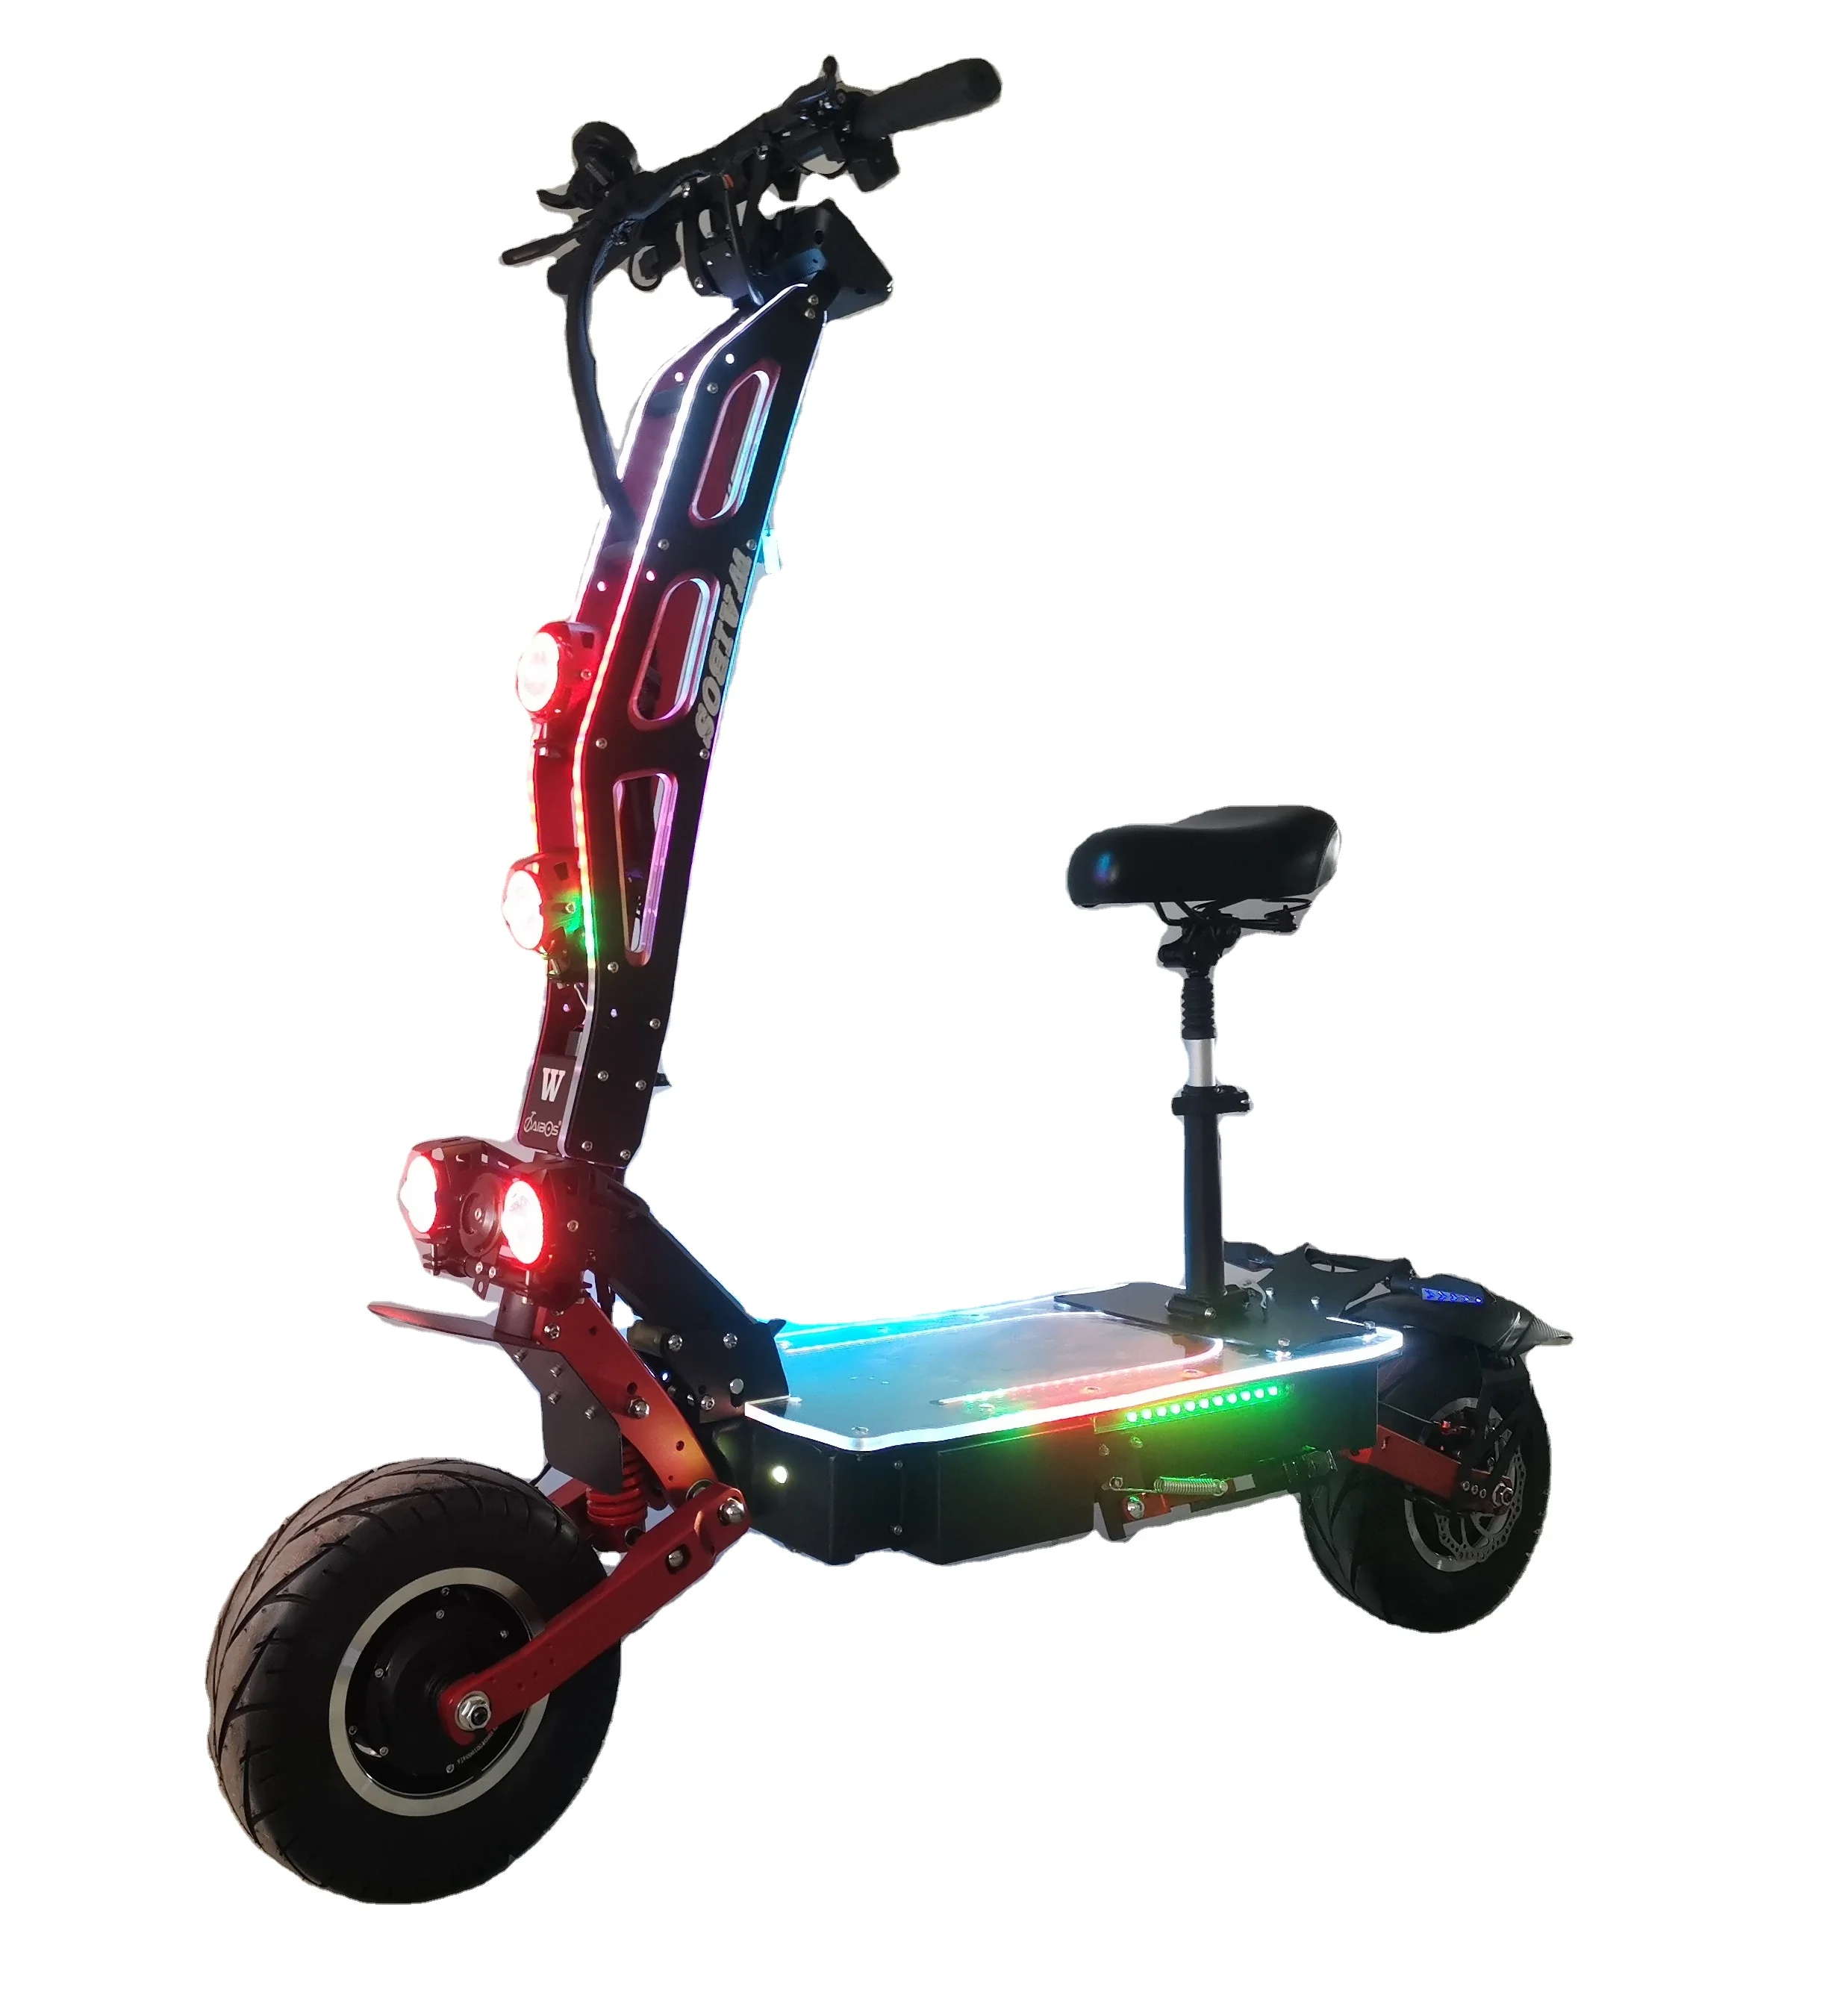 

Waibos 13 inch 80Ah battery 60v 72v 8000W 7000W 6000w dual motor foldable off road two wheel adult electric motorcycle scooter